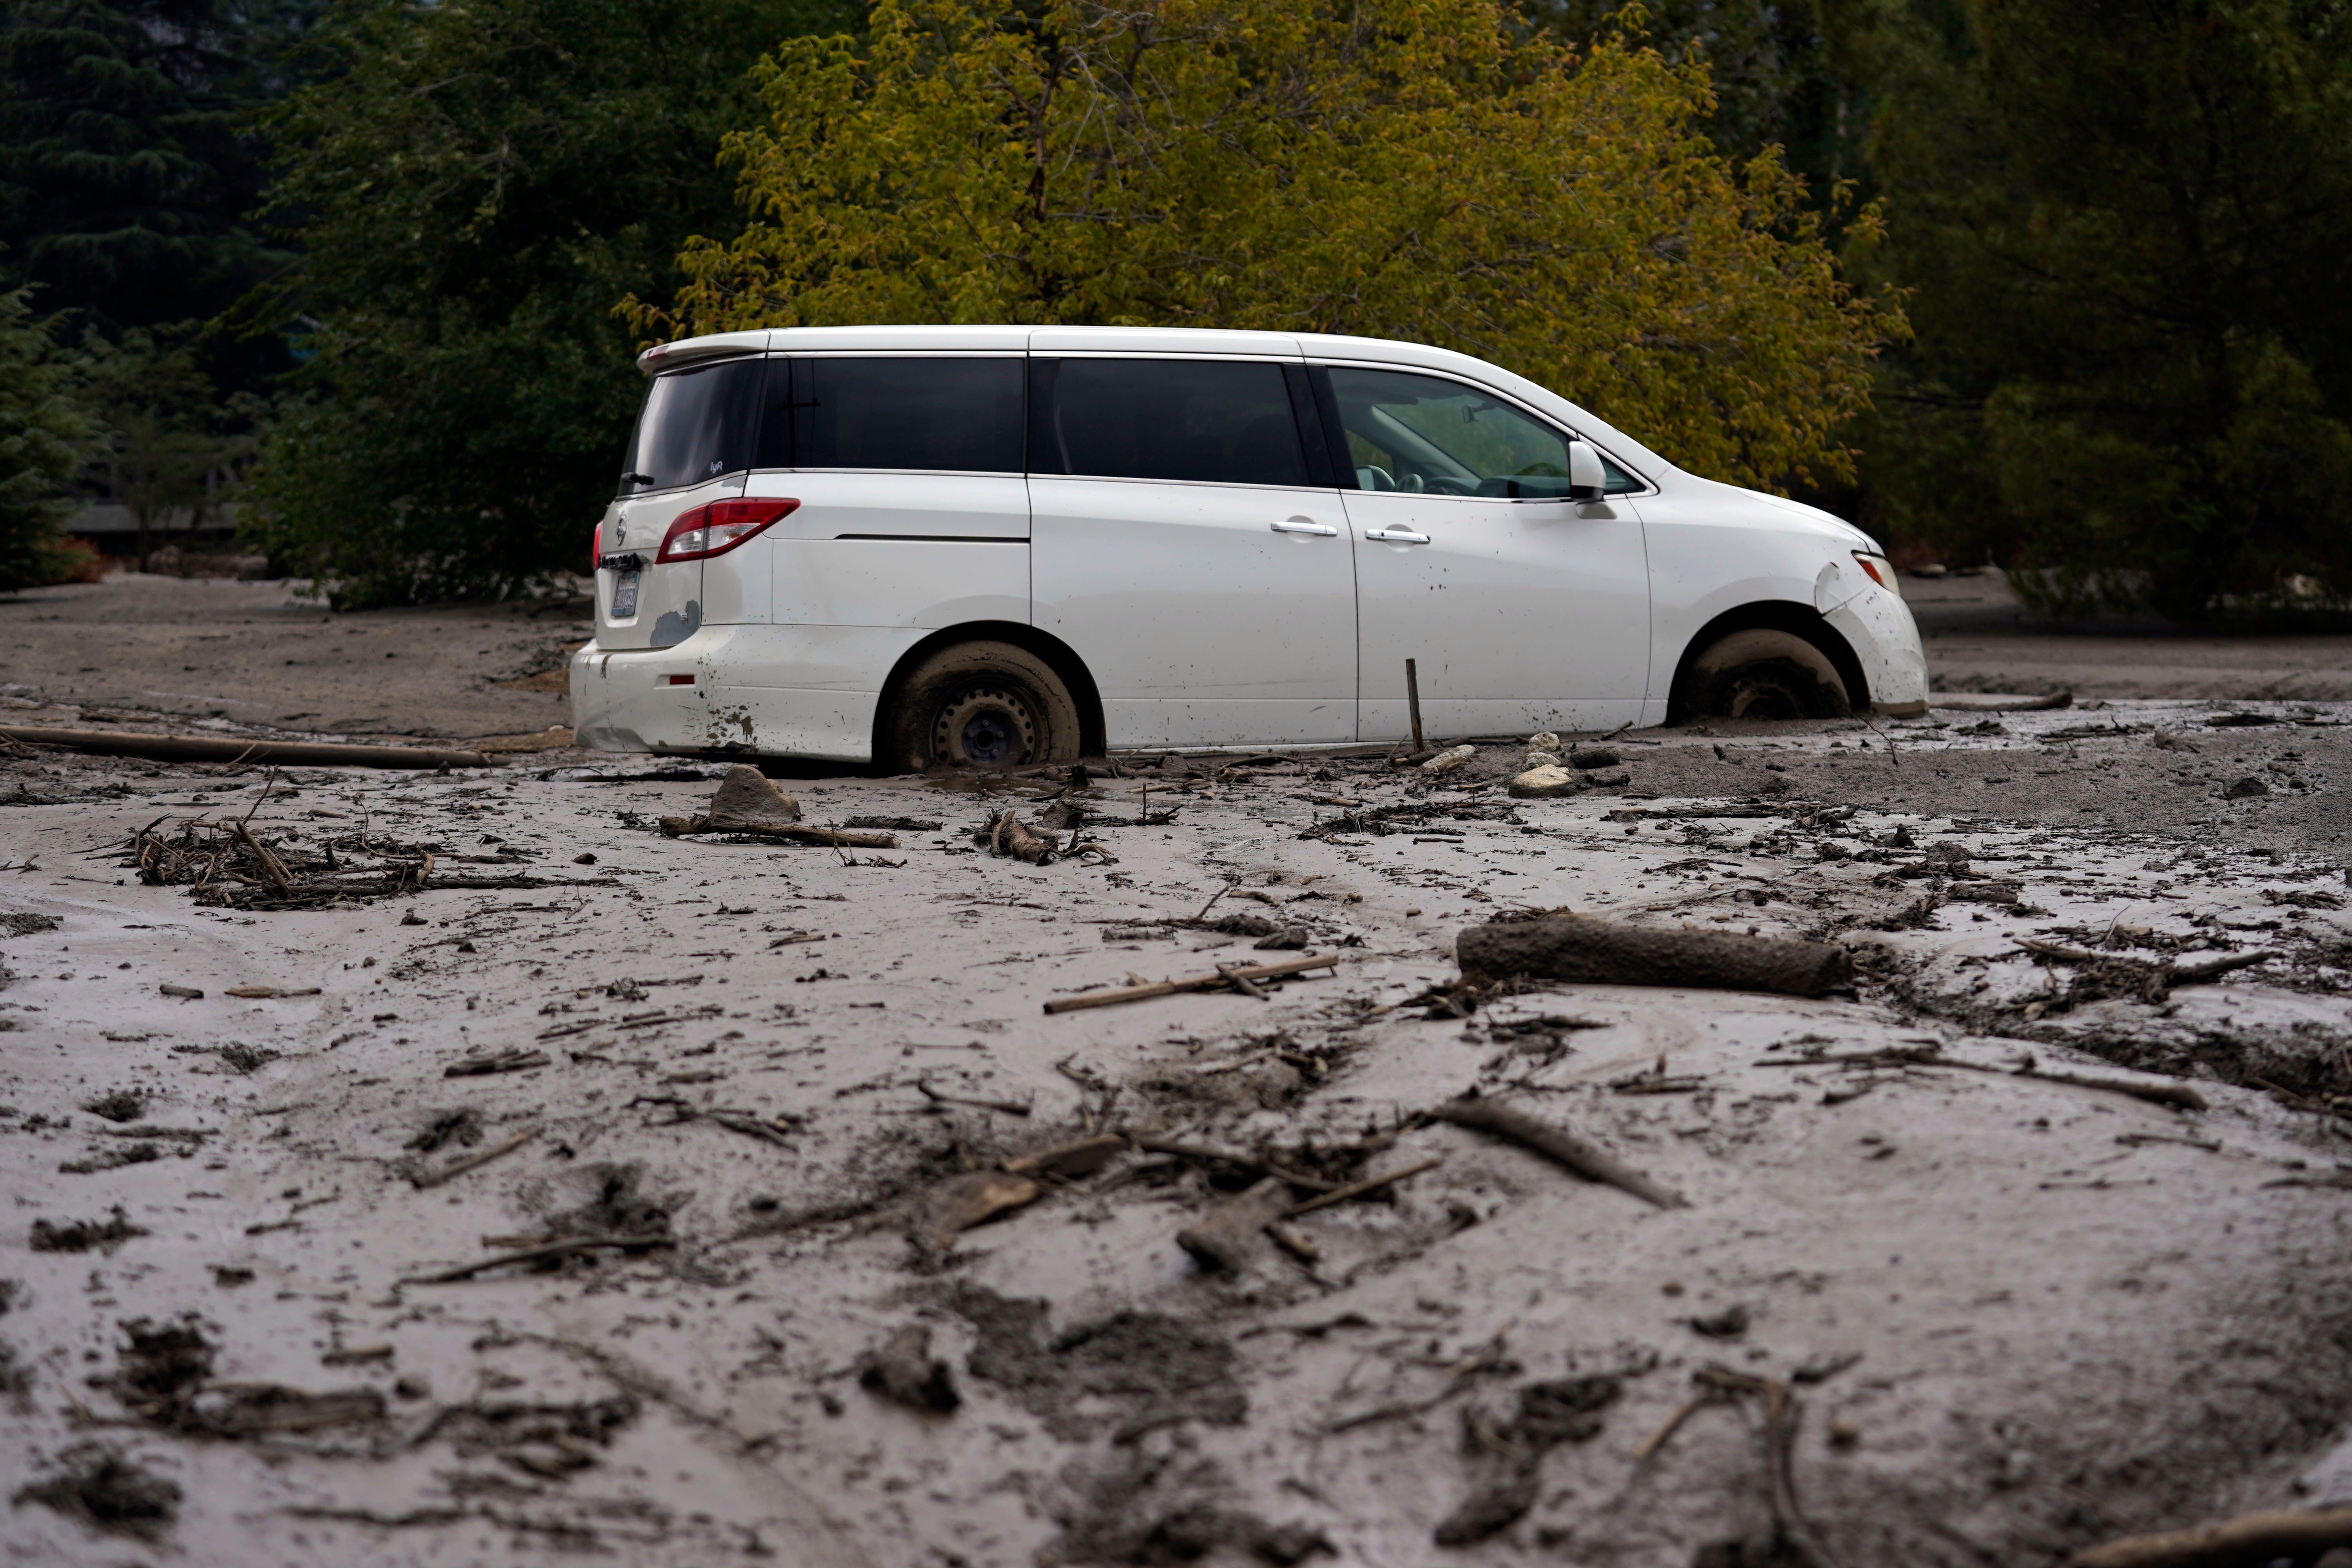 A vehicle is stuck in the mud in the aftermath of a mudslide Tuesday, Sept. 13, 2022, in Oak Glen, California. (Photo: Marcio Jose Sanchez, AP)